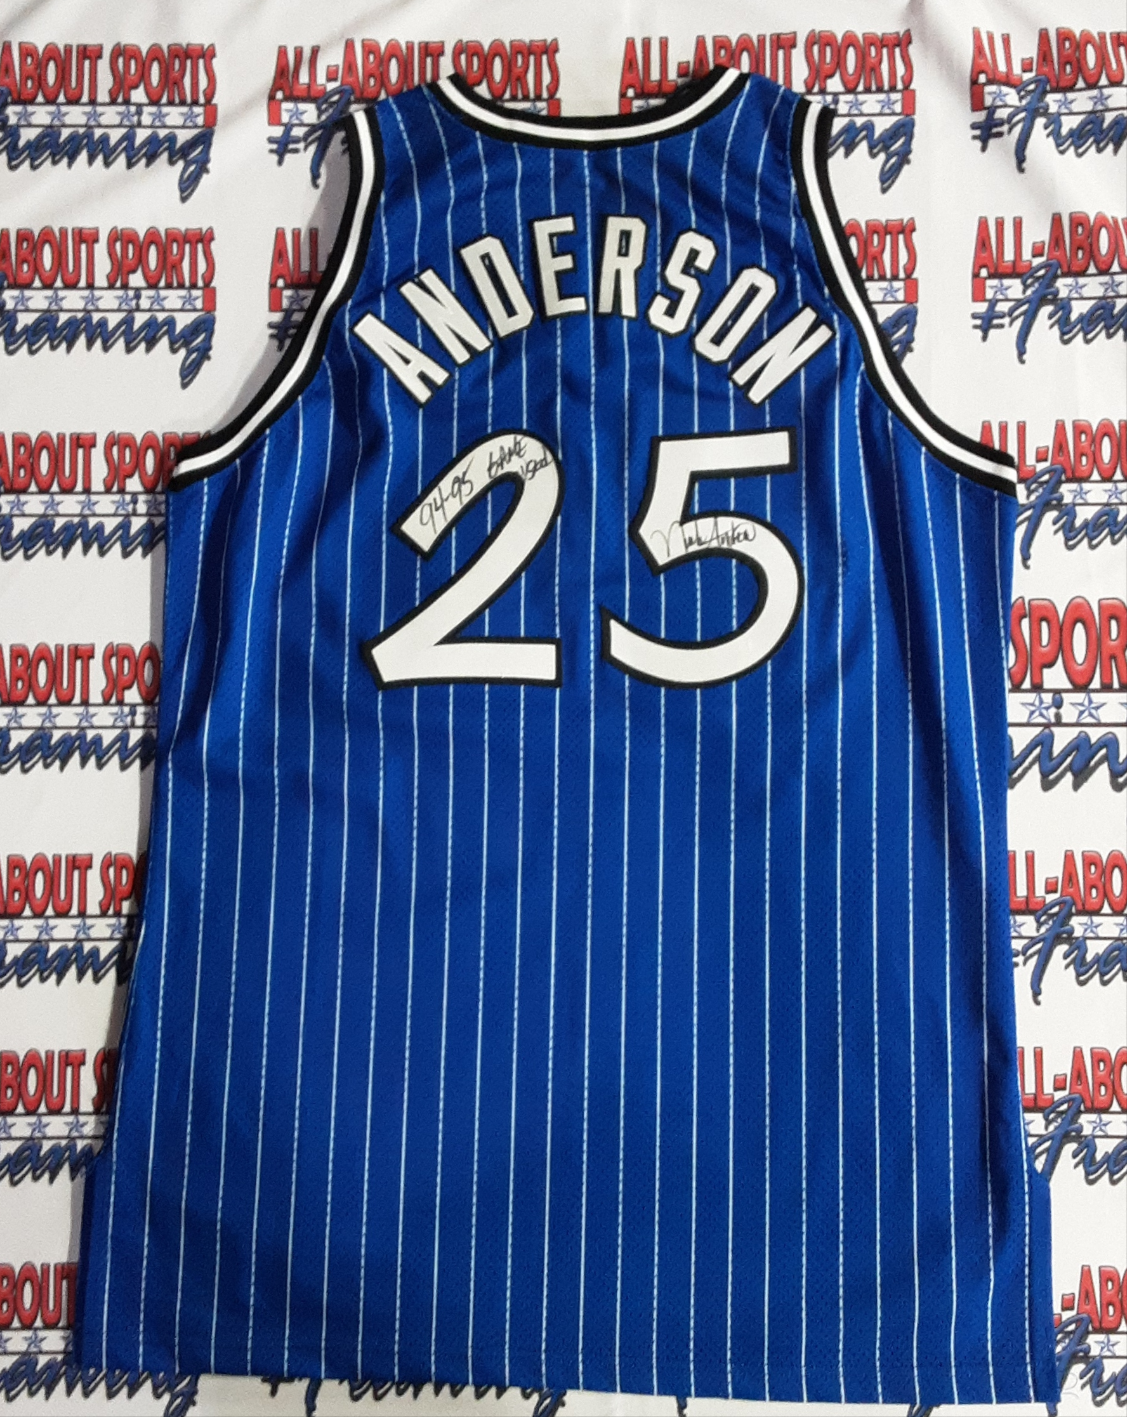 Nick Anderson Game Used Authentic Signed Pro Style Jersey with Inscription Autographed JSA-